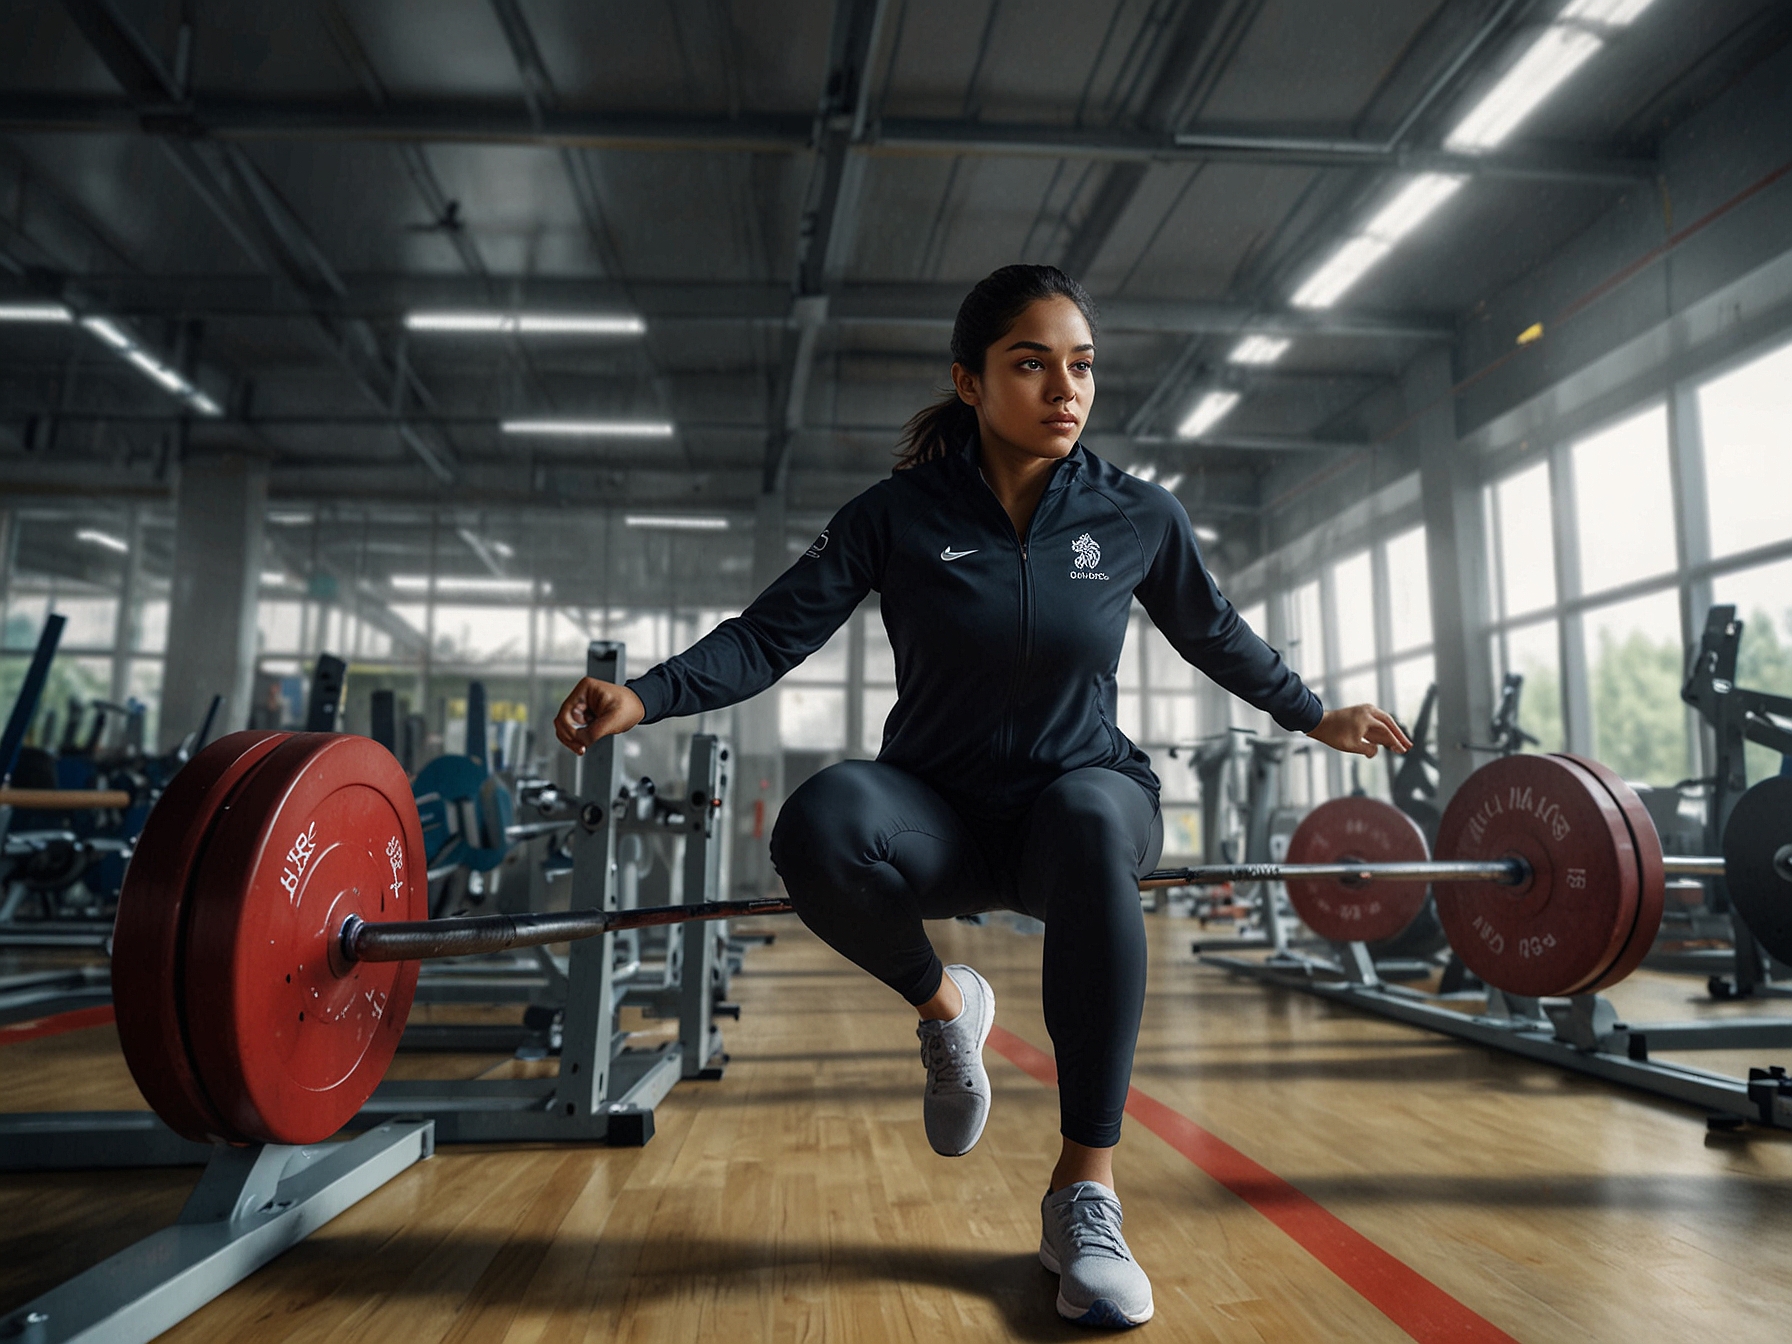 Sreeja Akula intensively trains at a top-tier facility in Germany, focusing on honing her technical skills and strategies as part of her preparation for the Paris 2024 Olympics.